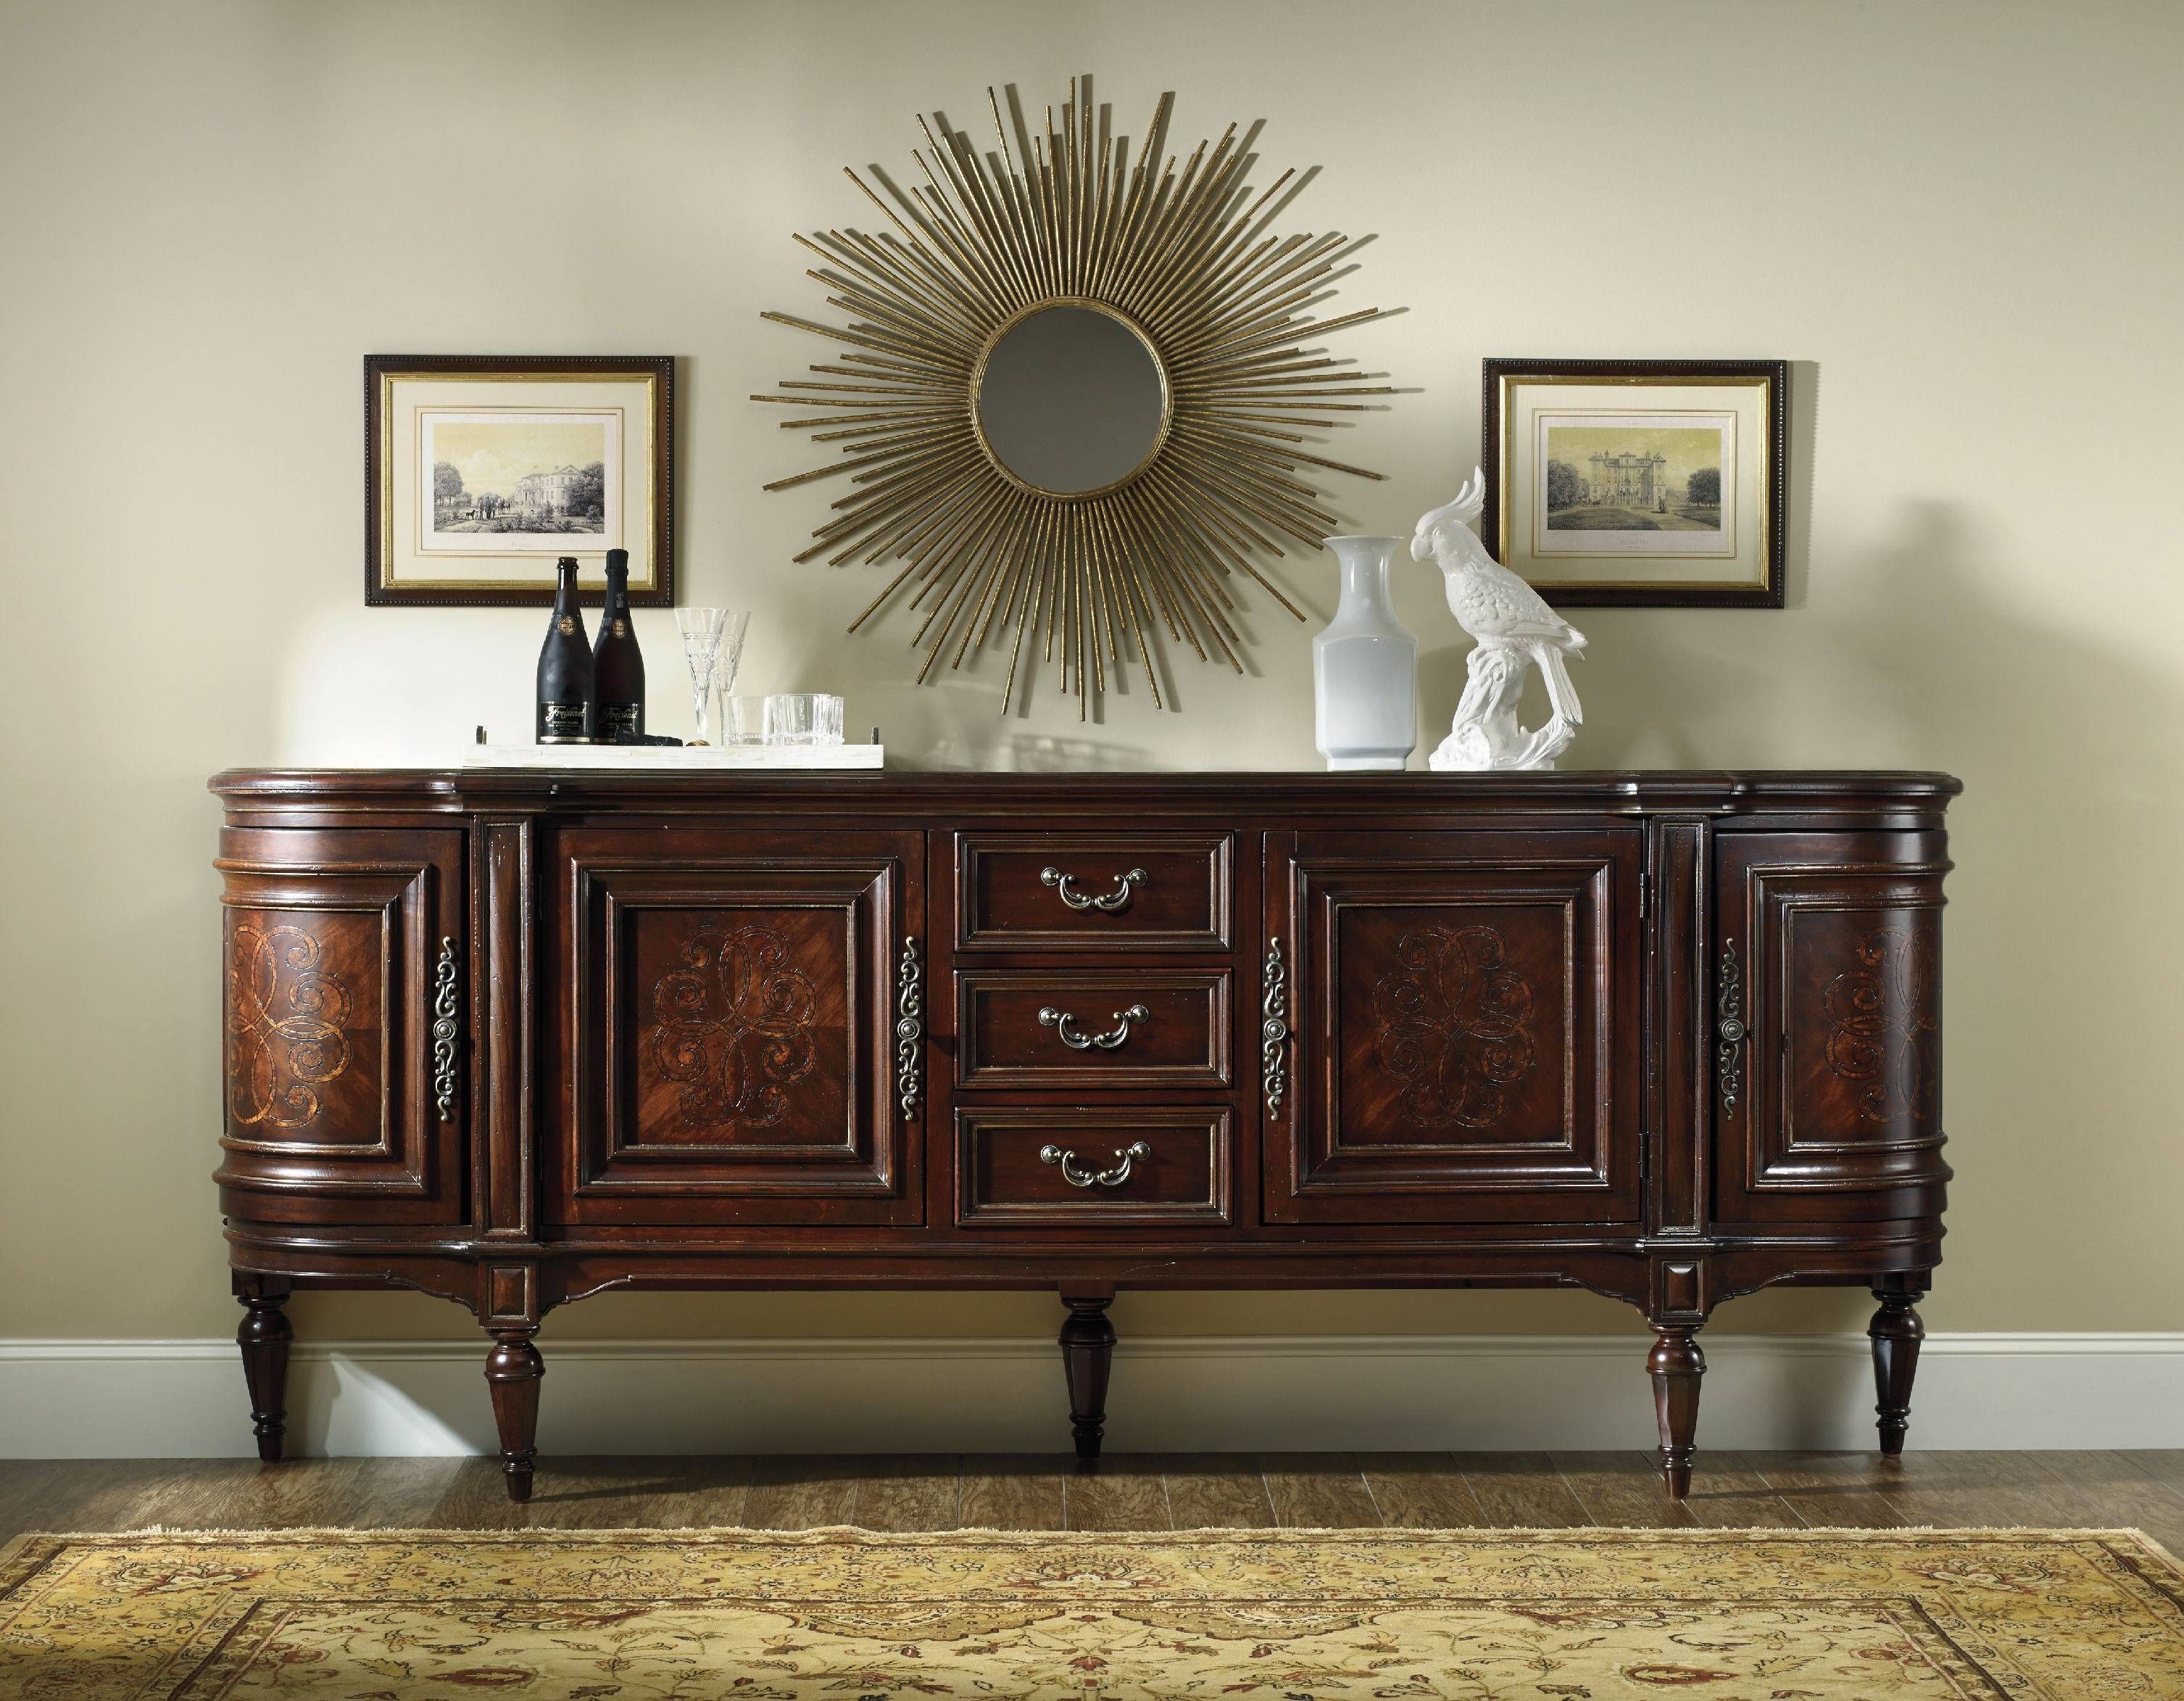 Decorating A Sideboard In A Dining Room